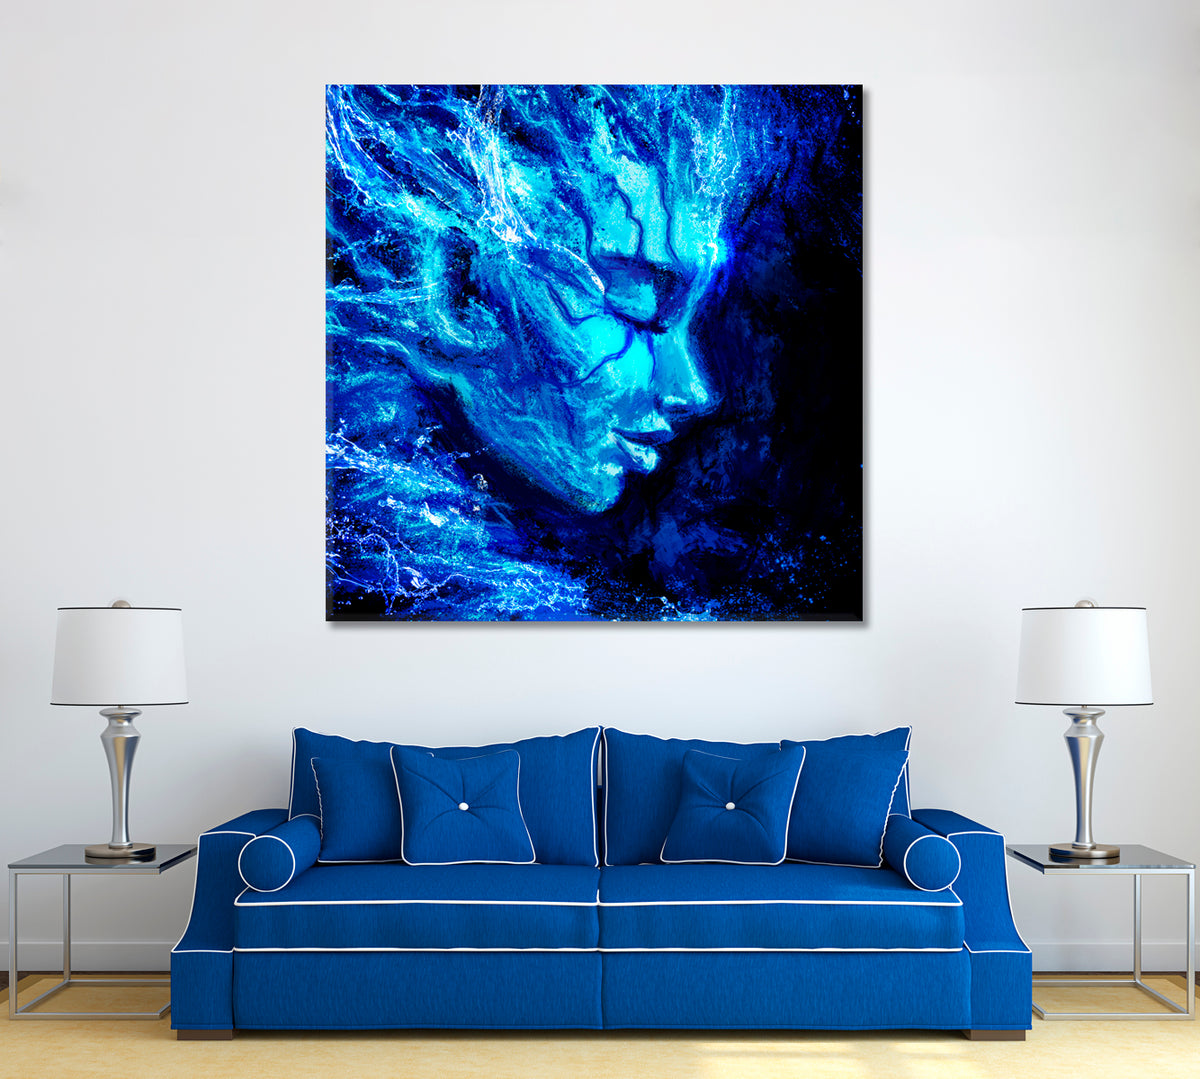 Water Girl Canvas Print ArtLexy 1 Panel 12"x12" inches 